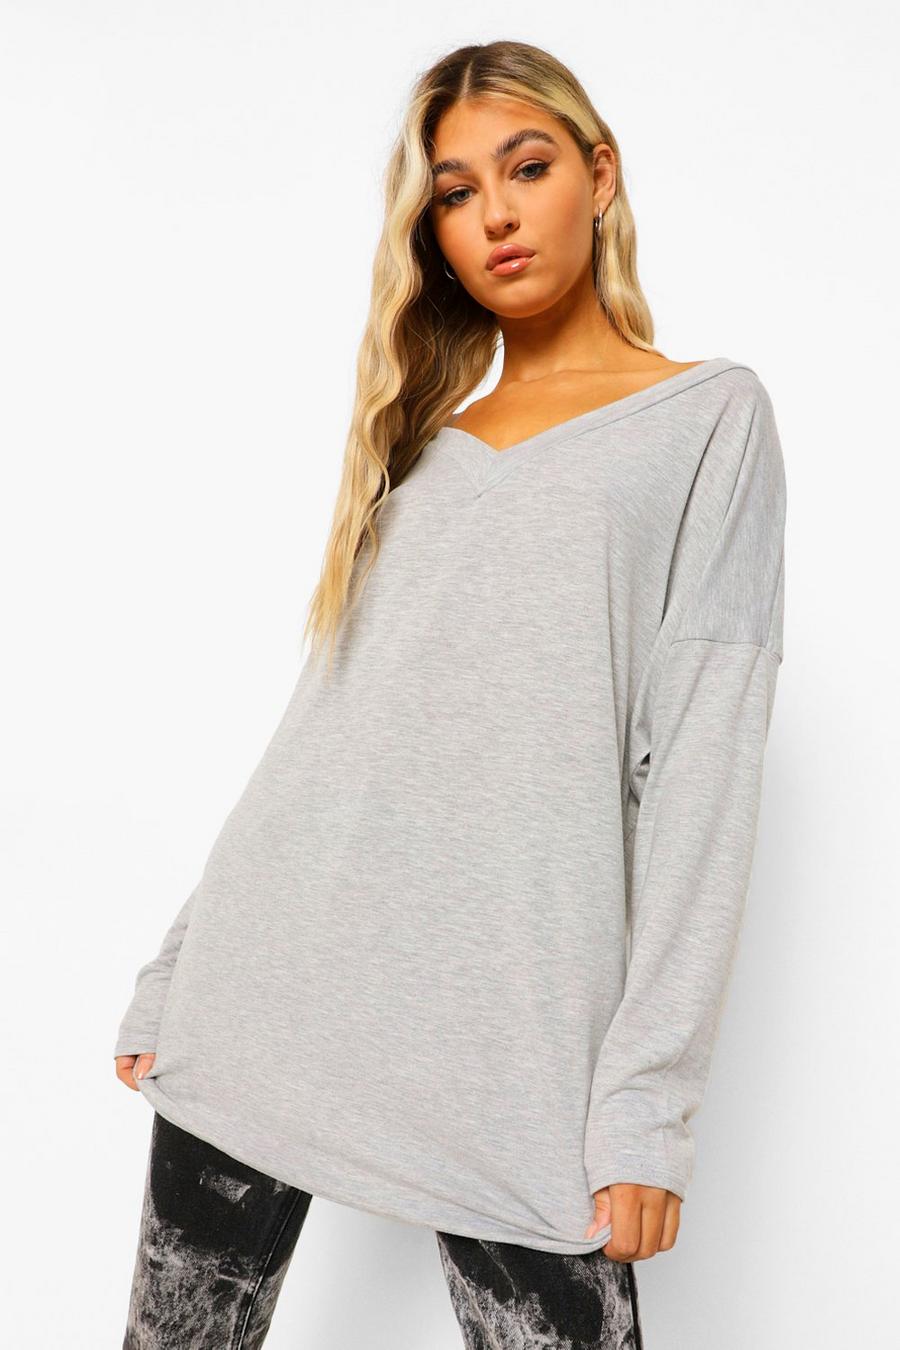 Grey Tall Basic Oversized Long Sleeve Top image number 1